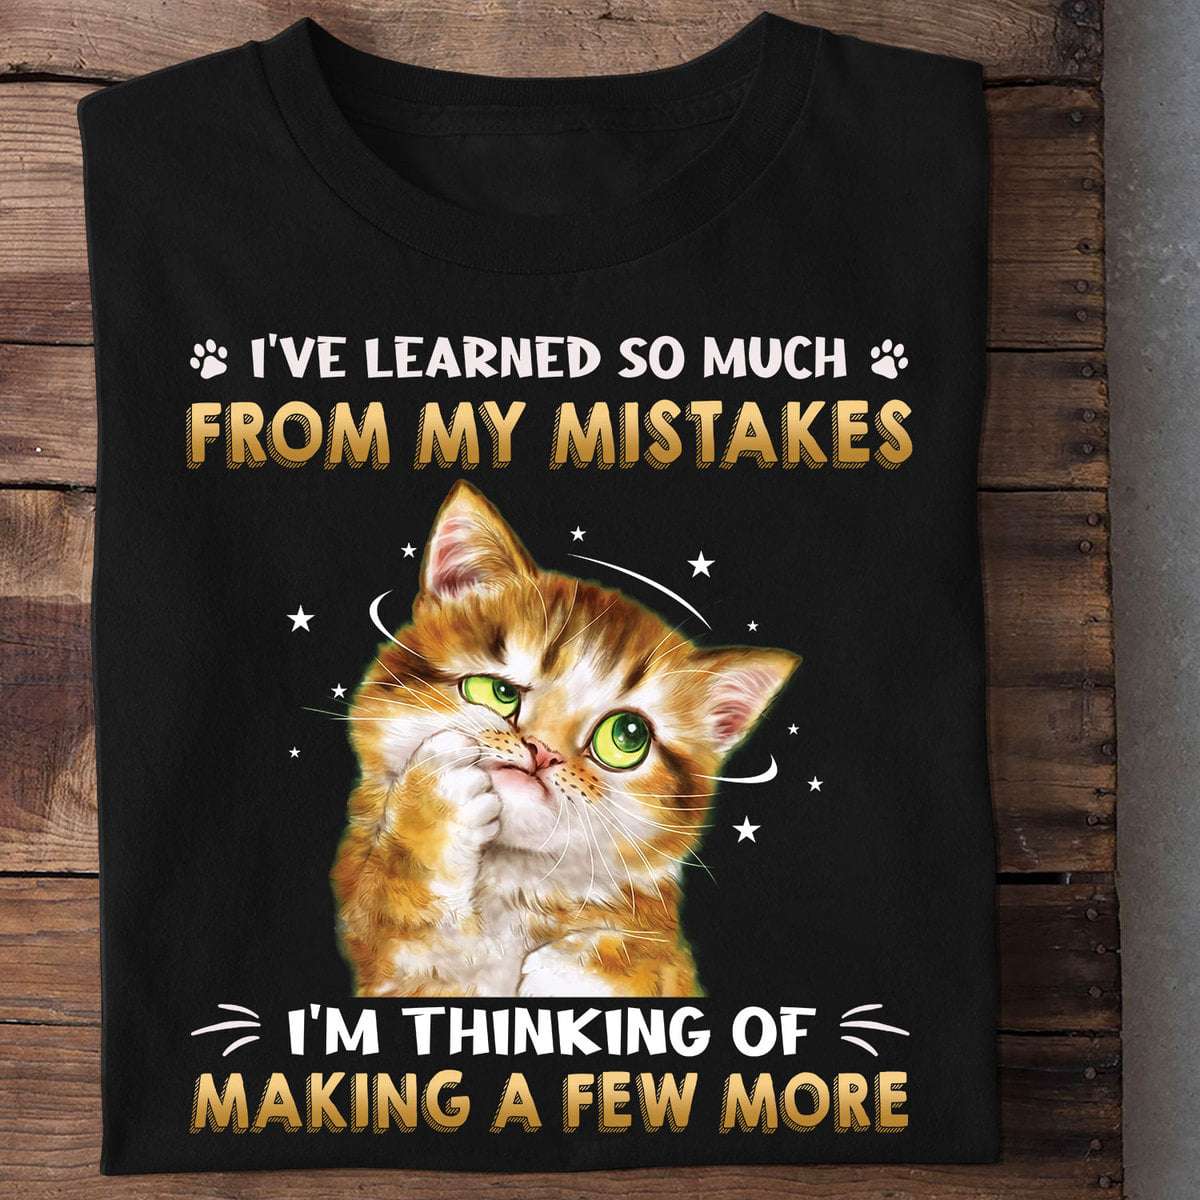 I've learned so much from my mistakes, I'm thinking of making a few more - Thinking cat, cute kitty cat